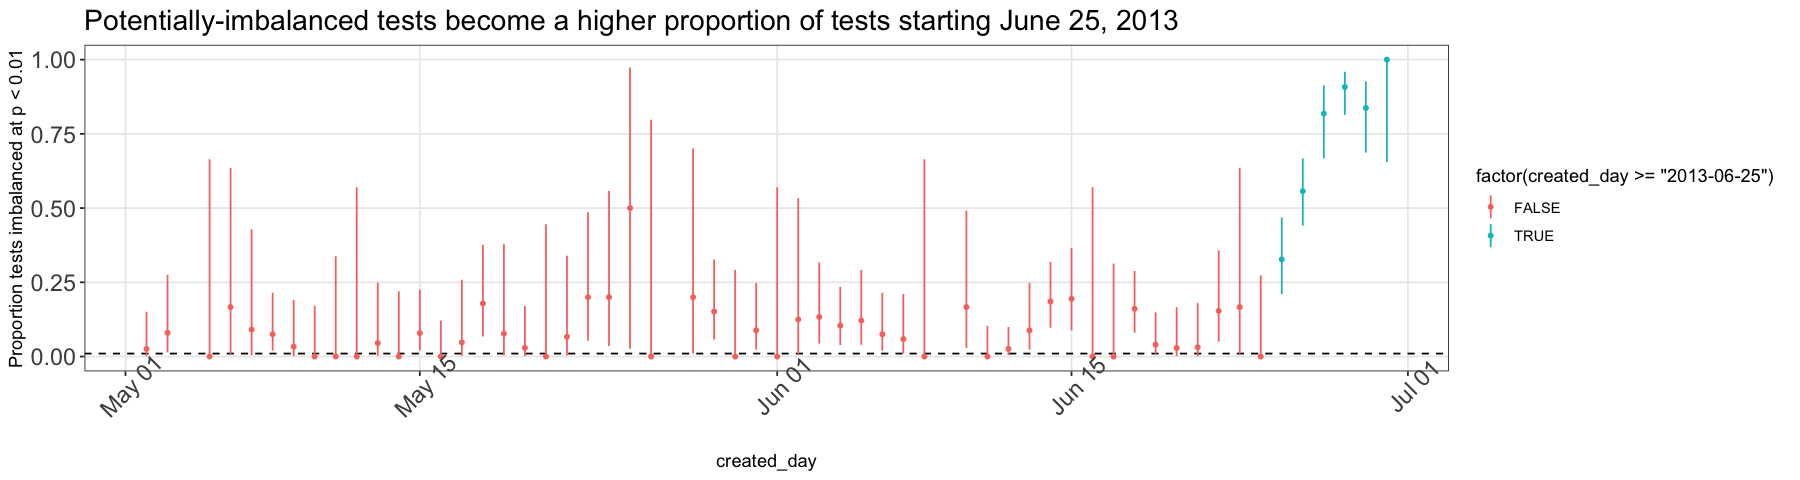 Potentially-imbalancved tests became a higher proportion of tests starting June 25, 2013